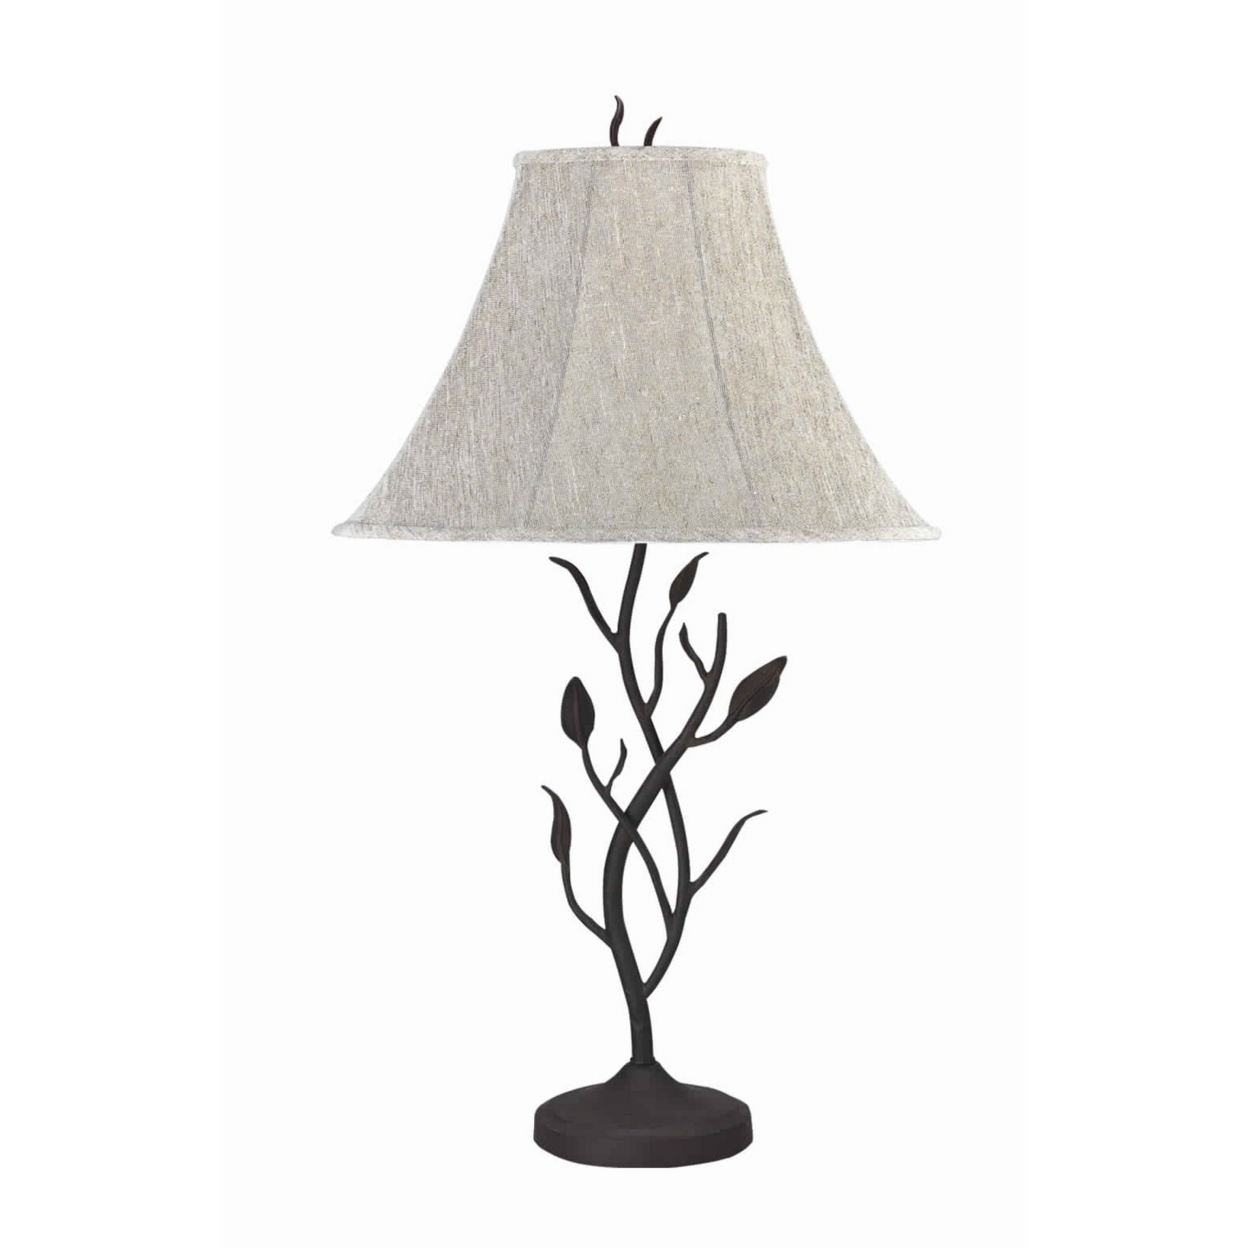 Metal Table Lamp With Leaf Accent Body And Fabric Bell Shade,Black And Gray- Saltoro Sherpi